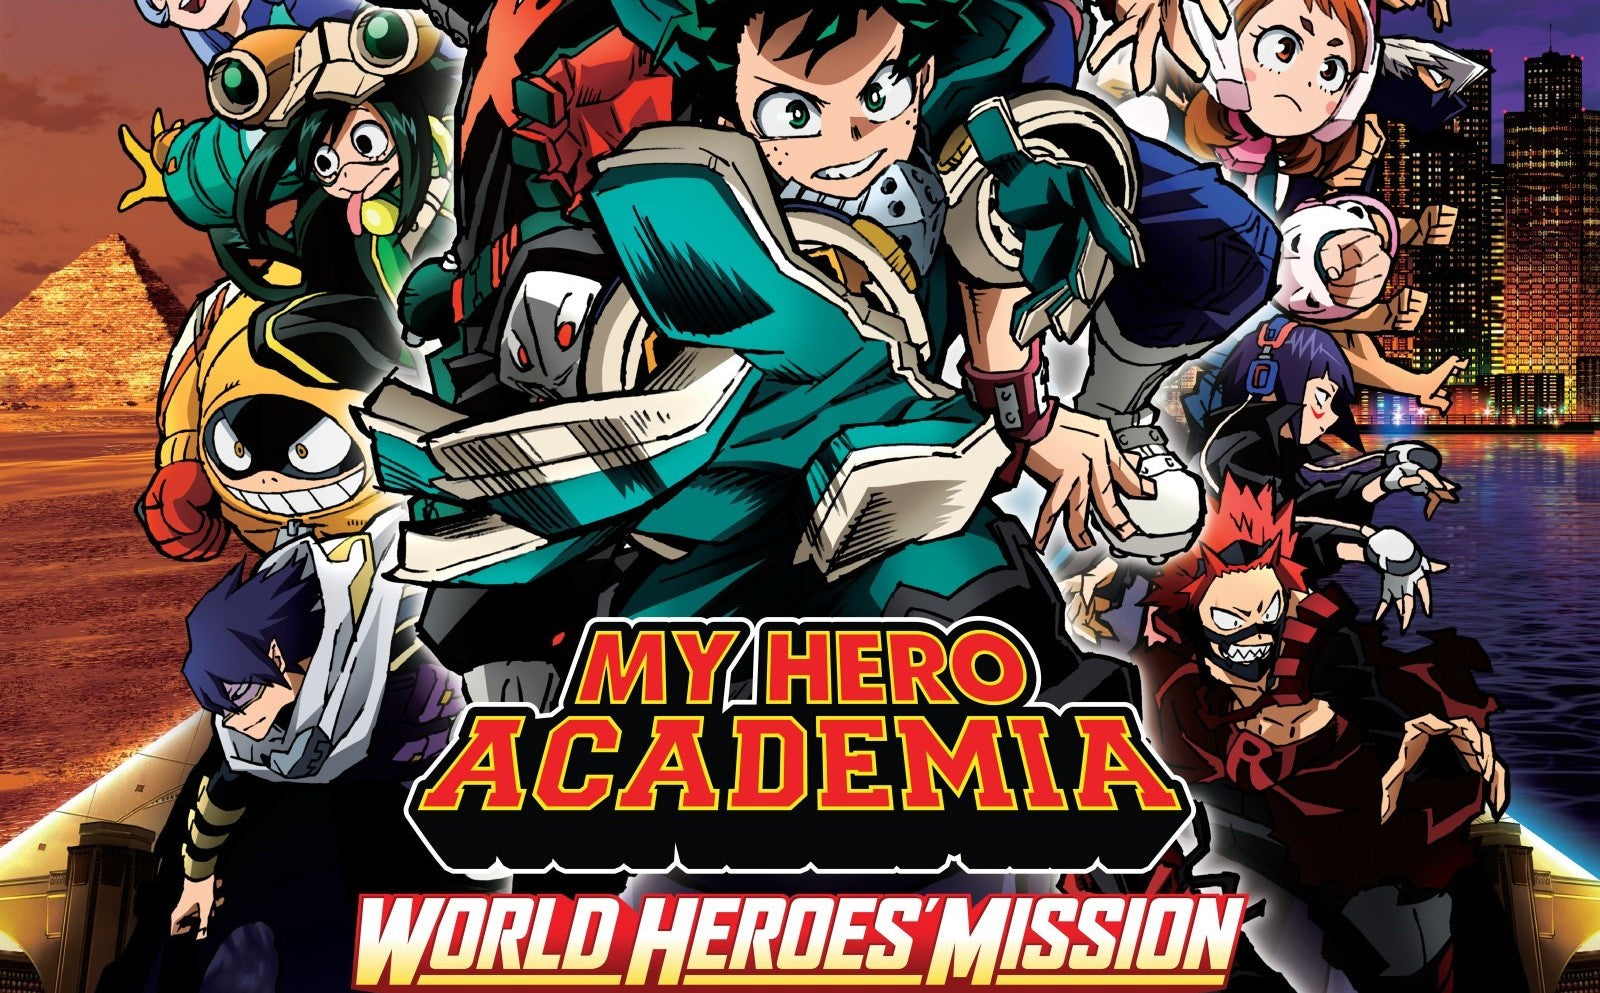 Funimation just Unveiled My Hero Academia ‘World Heroes Mission Anime Films English Dubbed Trailers, Tickets sale schedule, and a Special Manga Booklet for Theatergoers